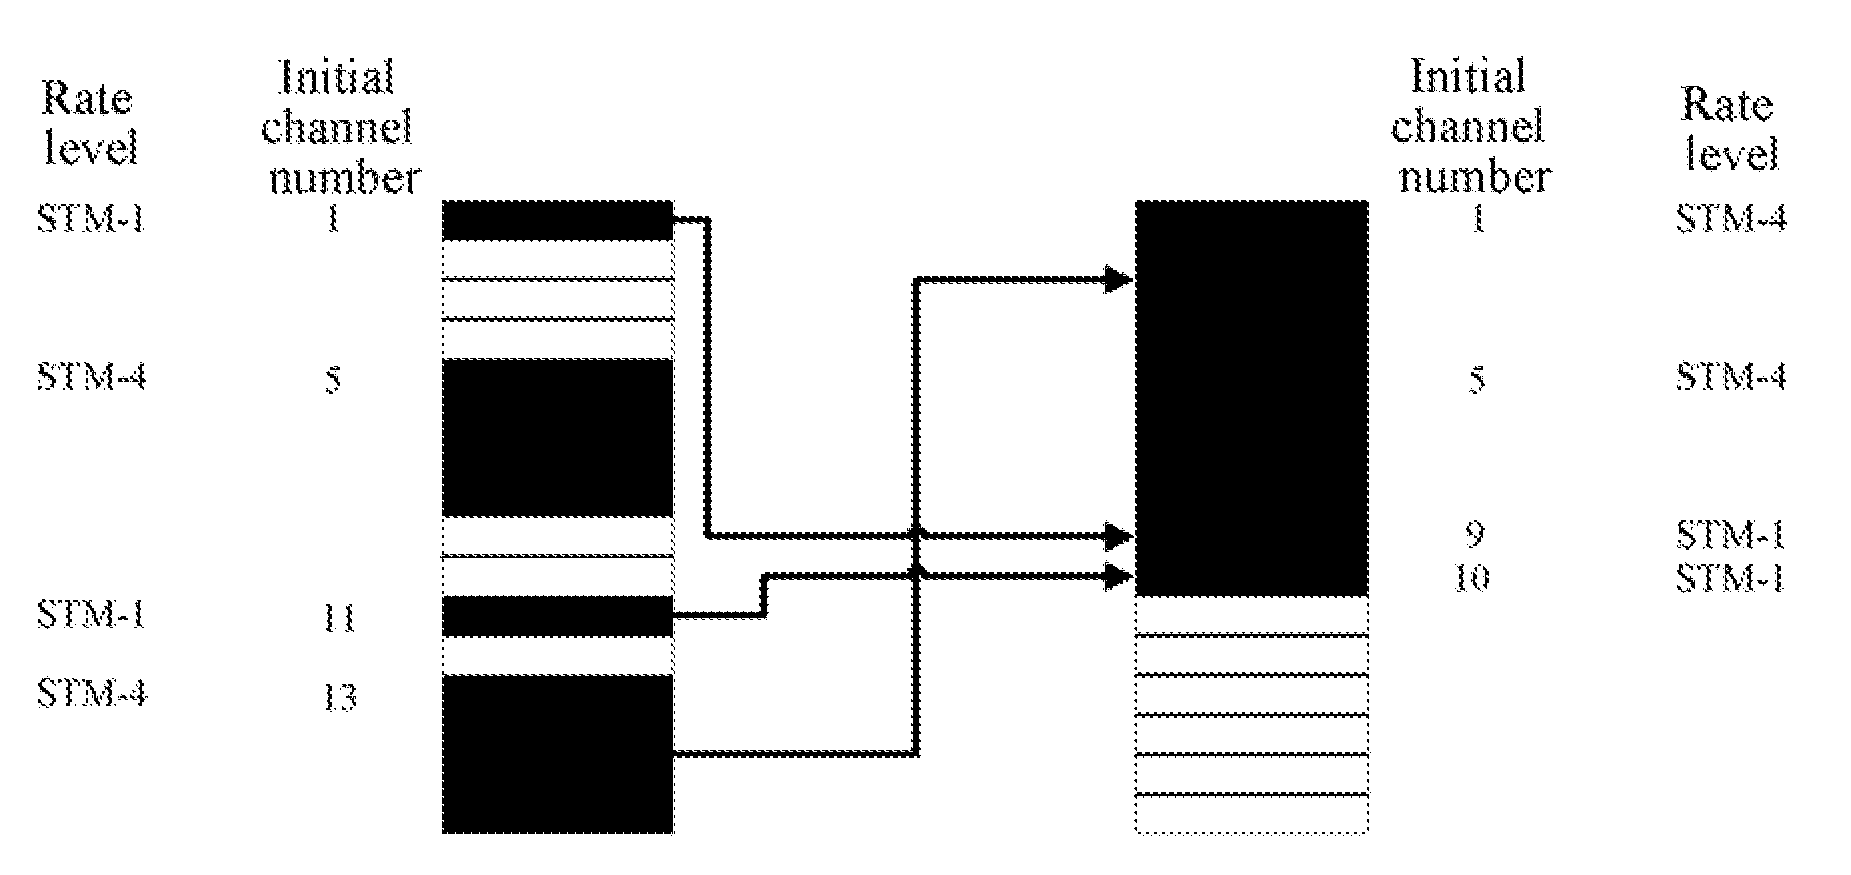 Method and System for Arranging Link Resource Fragments